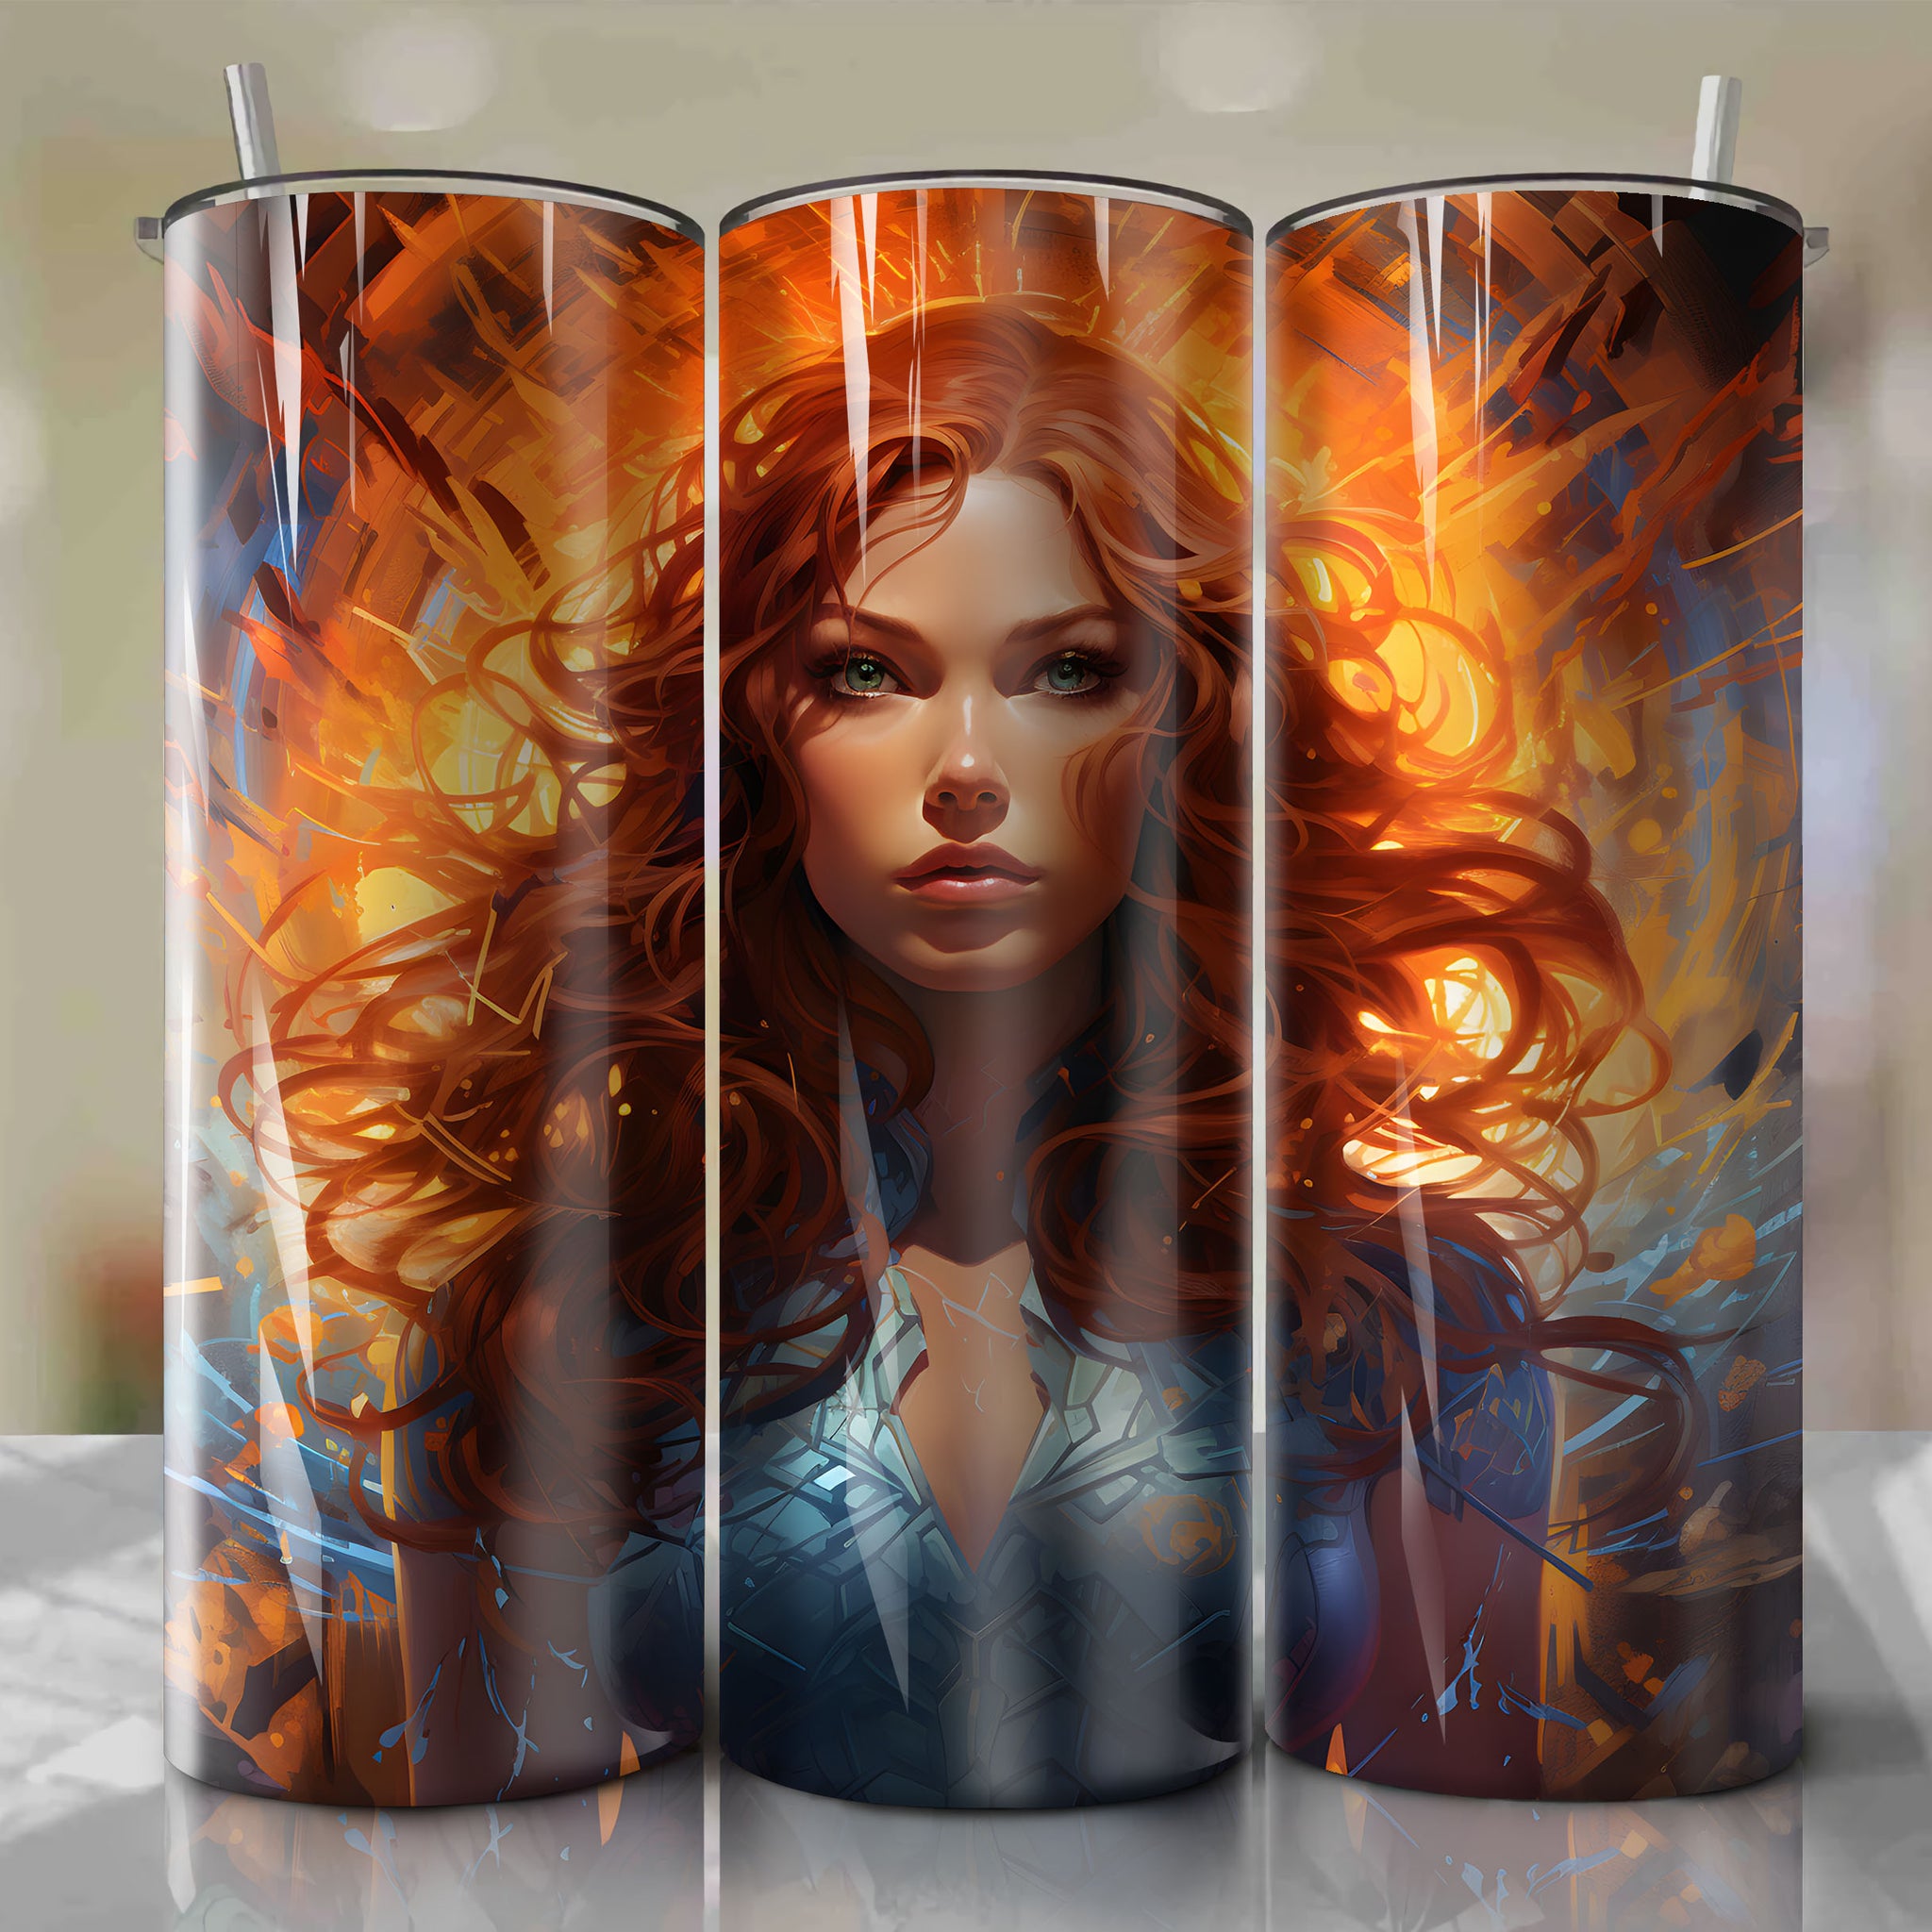 Jean Grey: The Empowered Mutant Unleashed - 20 Oz Tumbler Wrap
